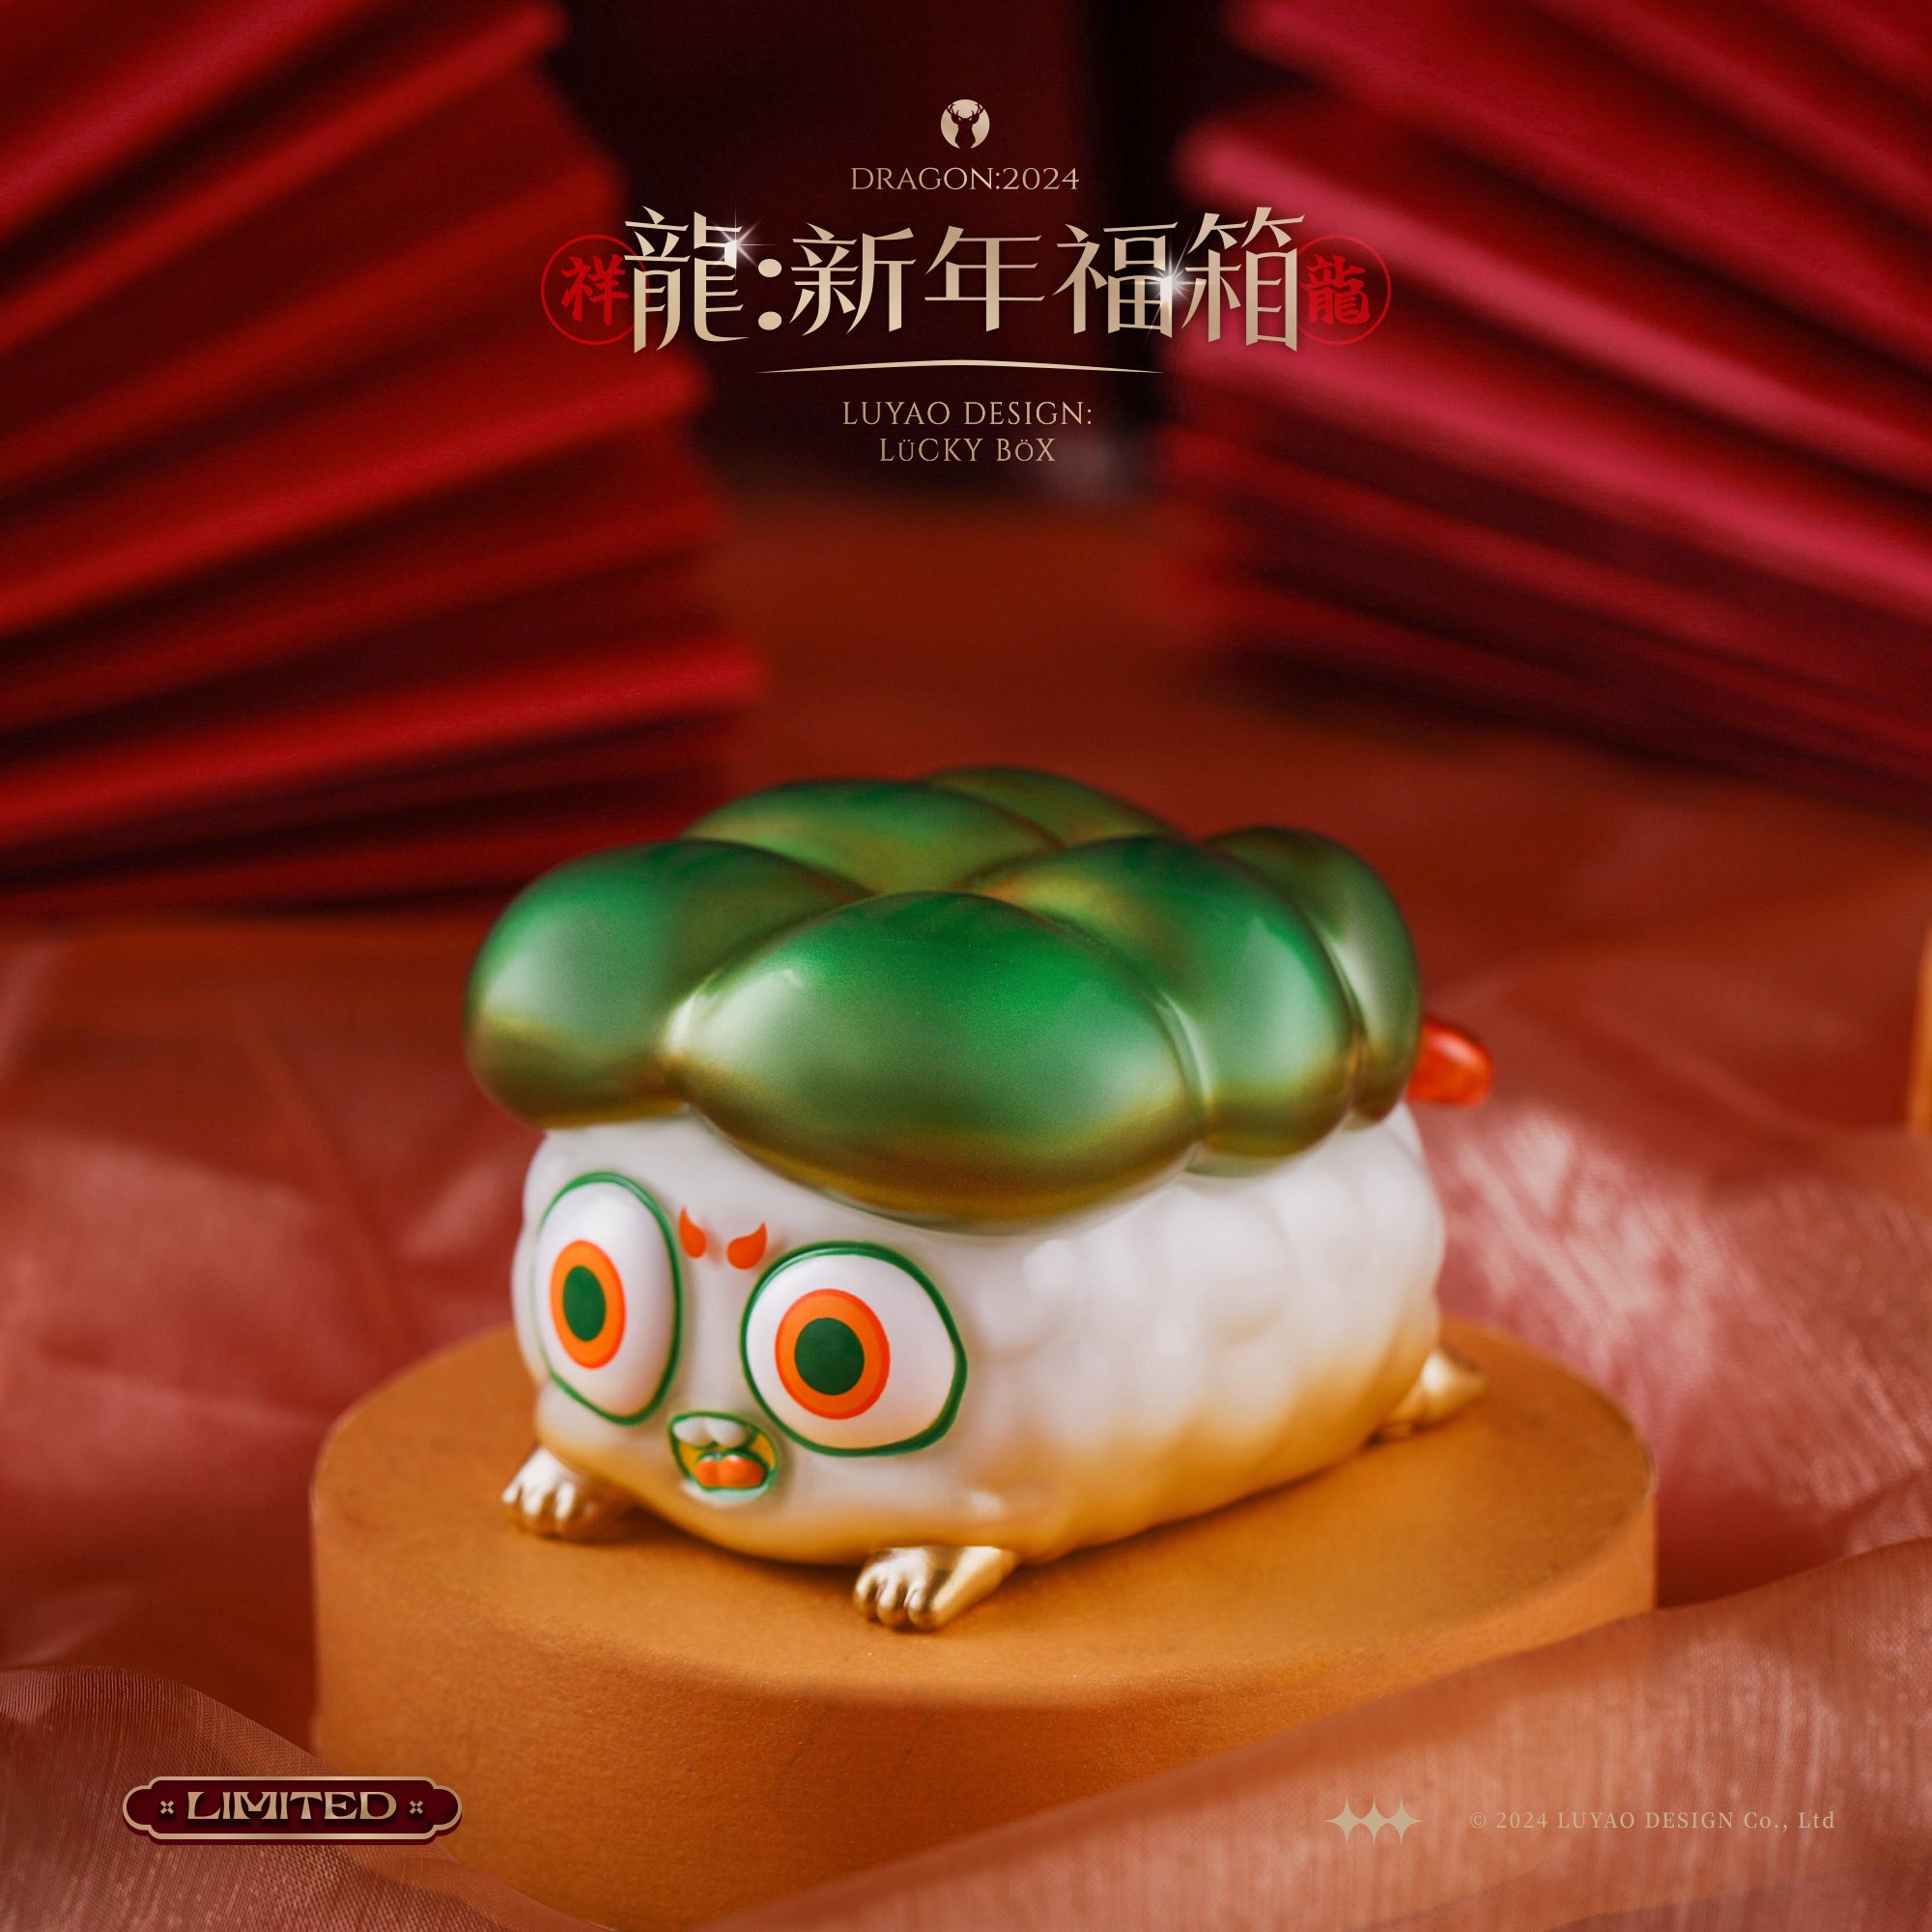 A toy sushi on a stand with a green head, close-up of a toy, green egg, and sign. One Bite SU - Preorder.